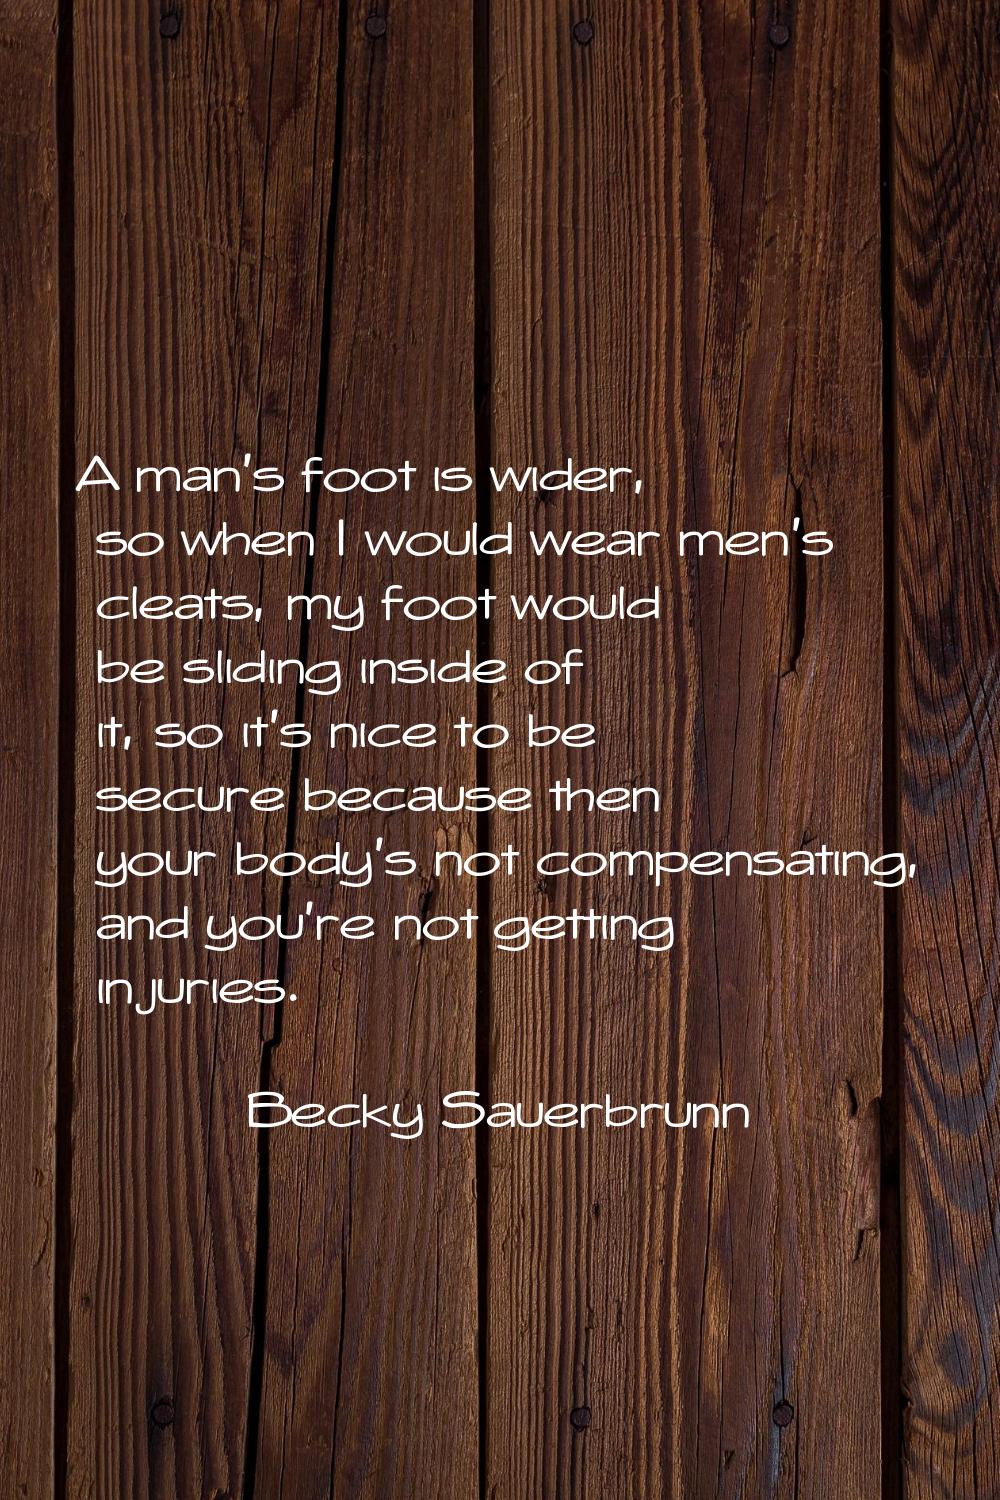 A man's foot is wider, so when I would wear men's cleats, my foot would be sliding inside of it, so